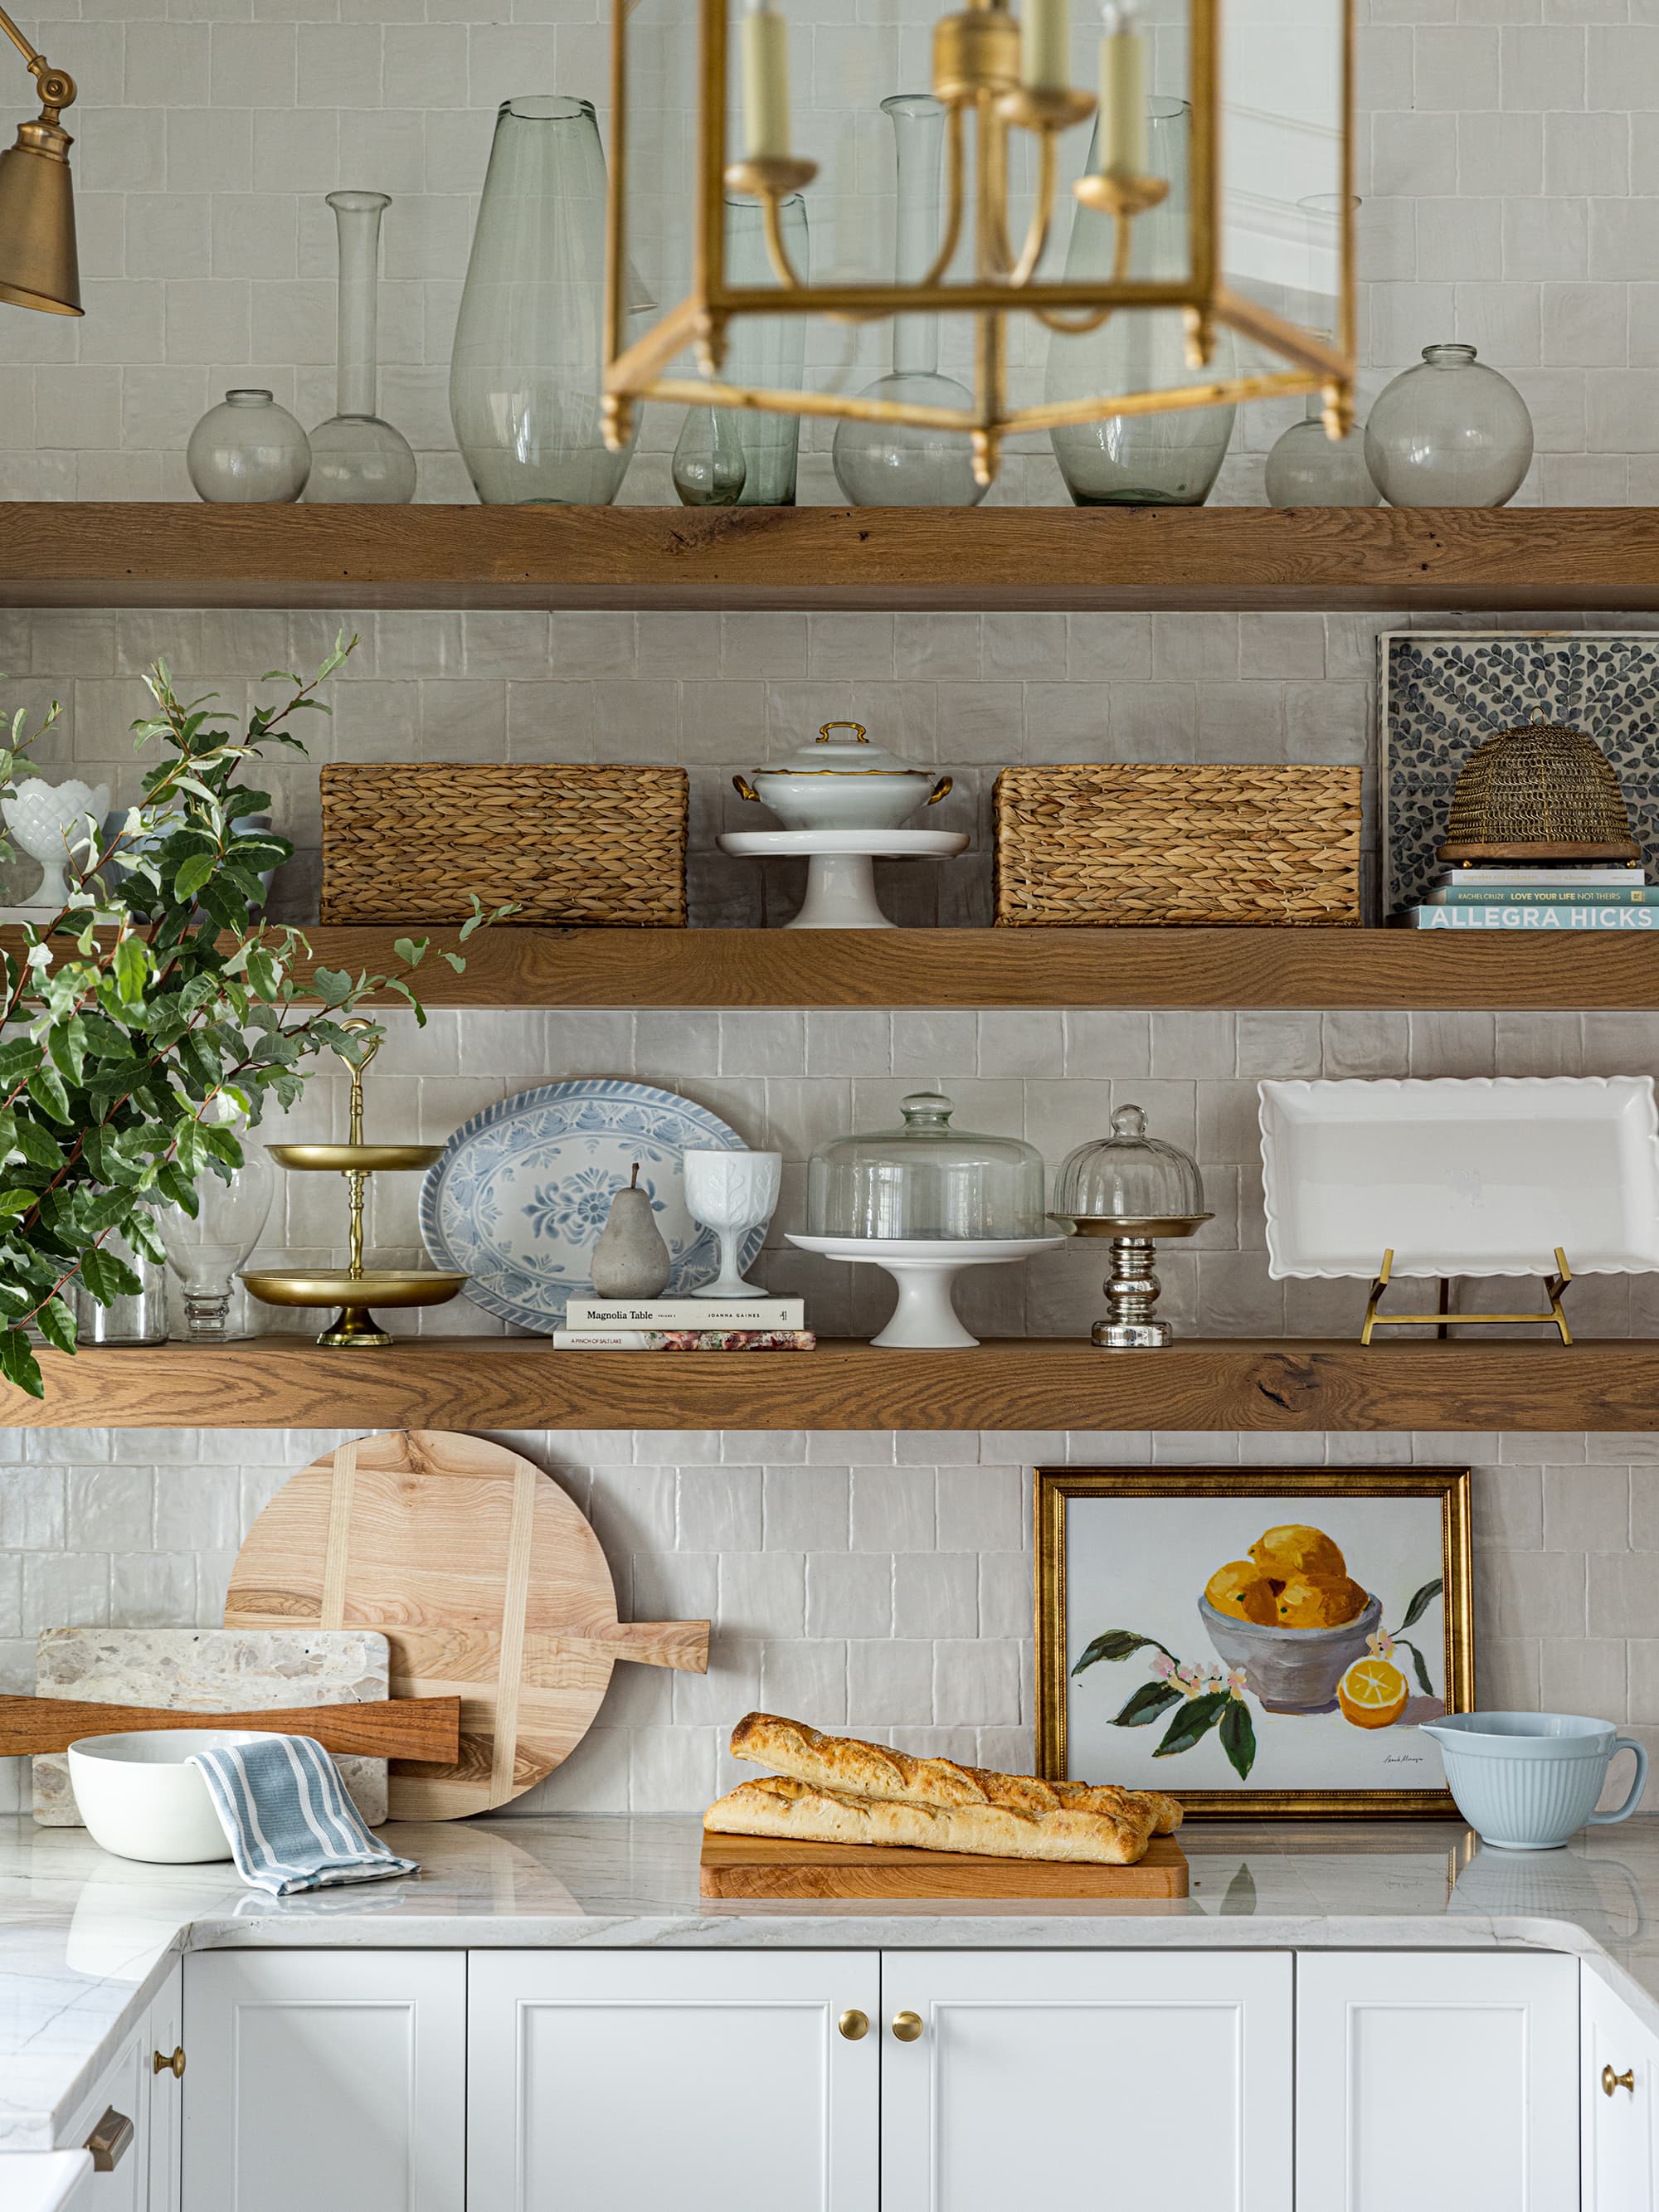 The 10 Biggest Kitchen Trends of 2023 So Far, According to